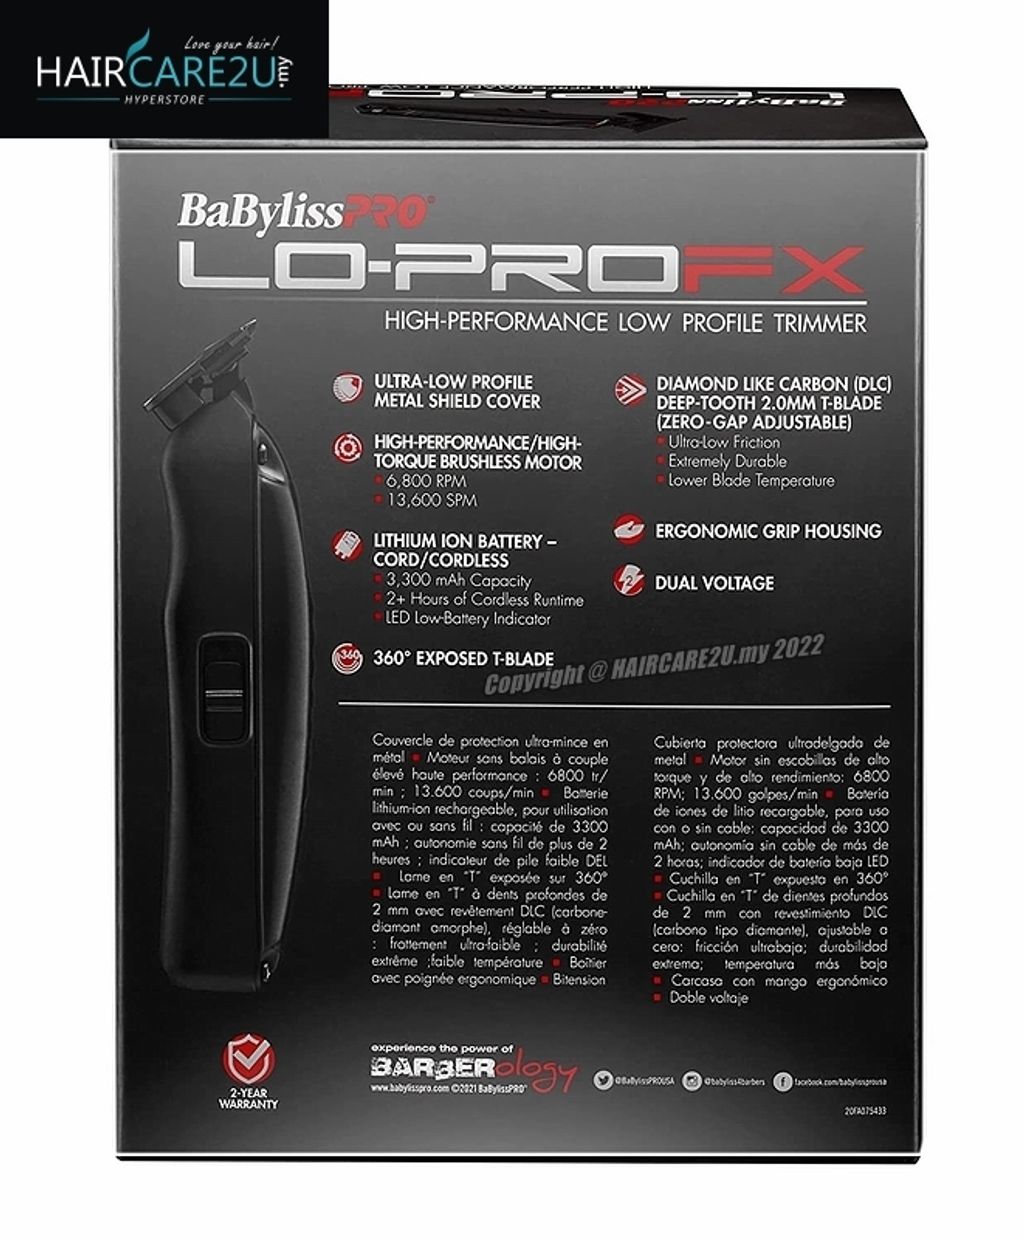 BaByliss Pro LO-PROFX High-Performance Low Profile Trimmer #FX726 8.jpg